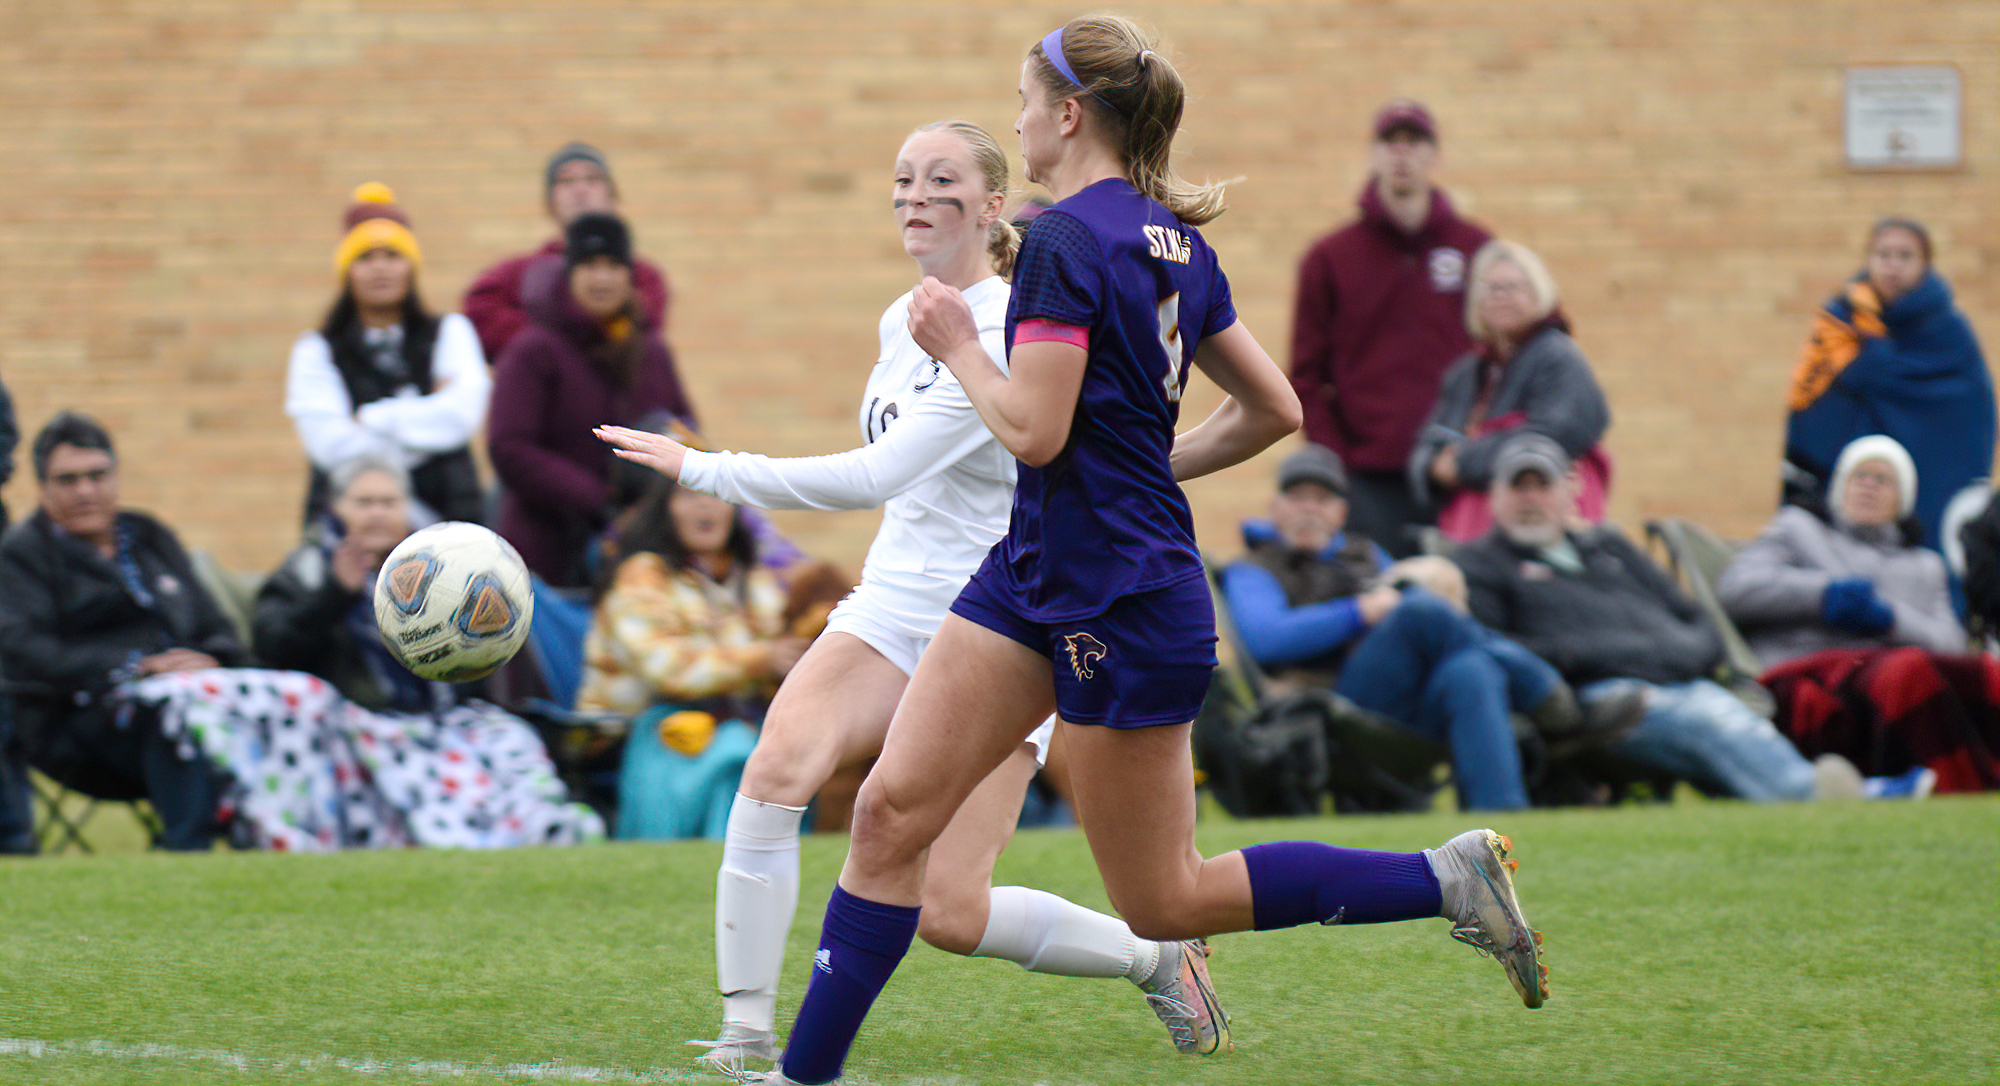 Emma Sheflo lets loose with the shot that gave the Cobbers a 1-0 lead in their battle with regionally-ranked St. Catherine.